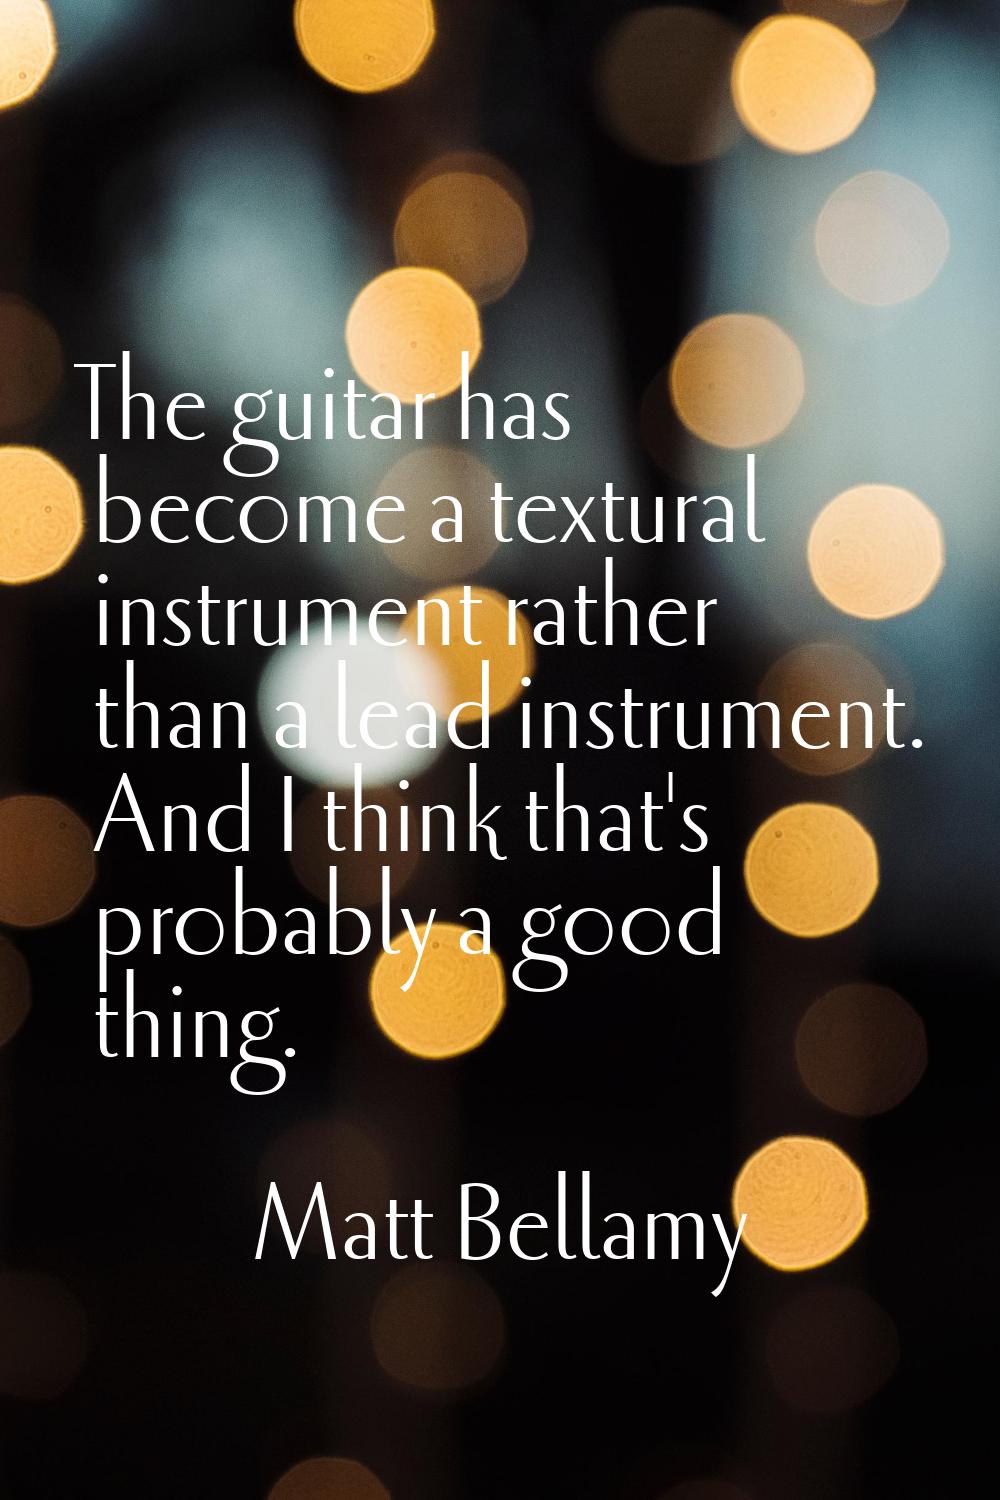 The guitar has become a textural instrument rather than a lead instrument. And I think that's proba